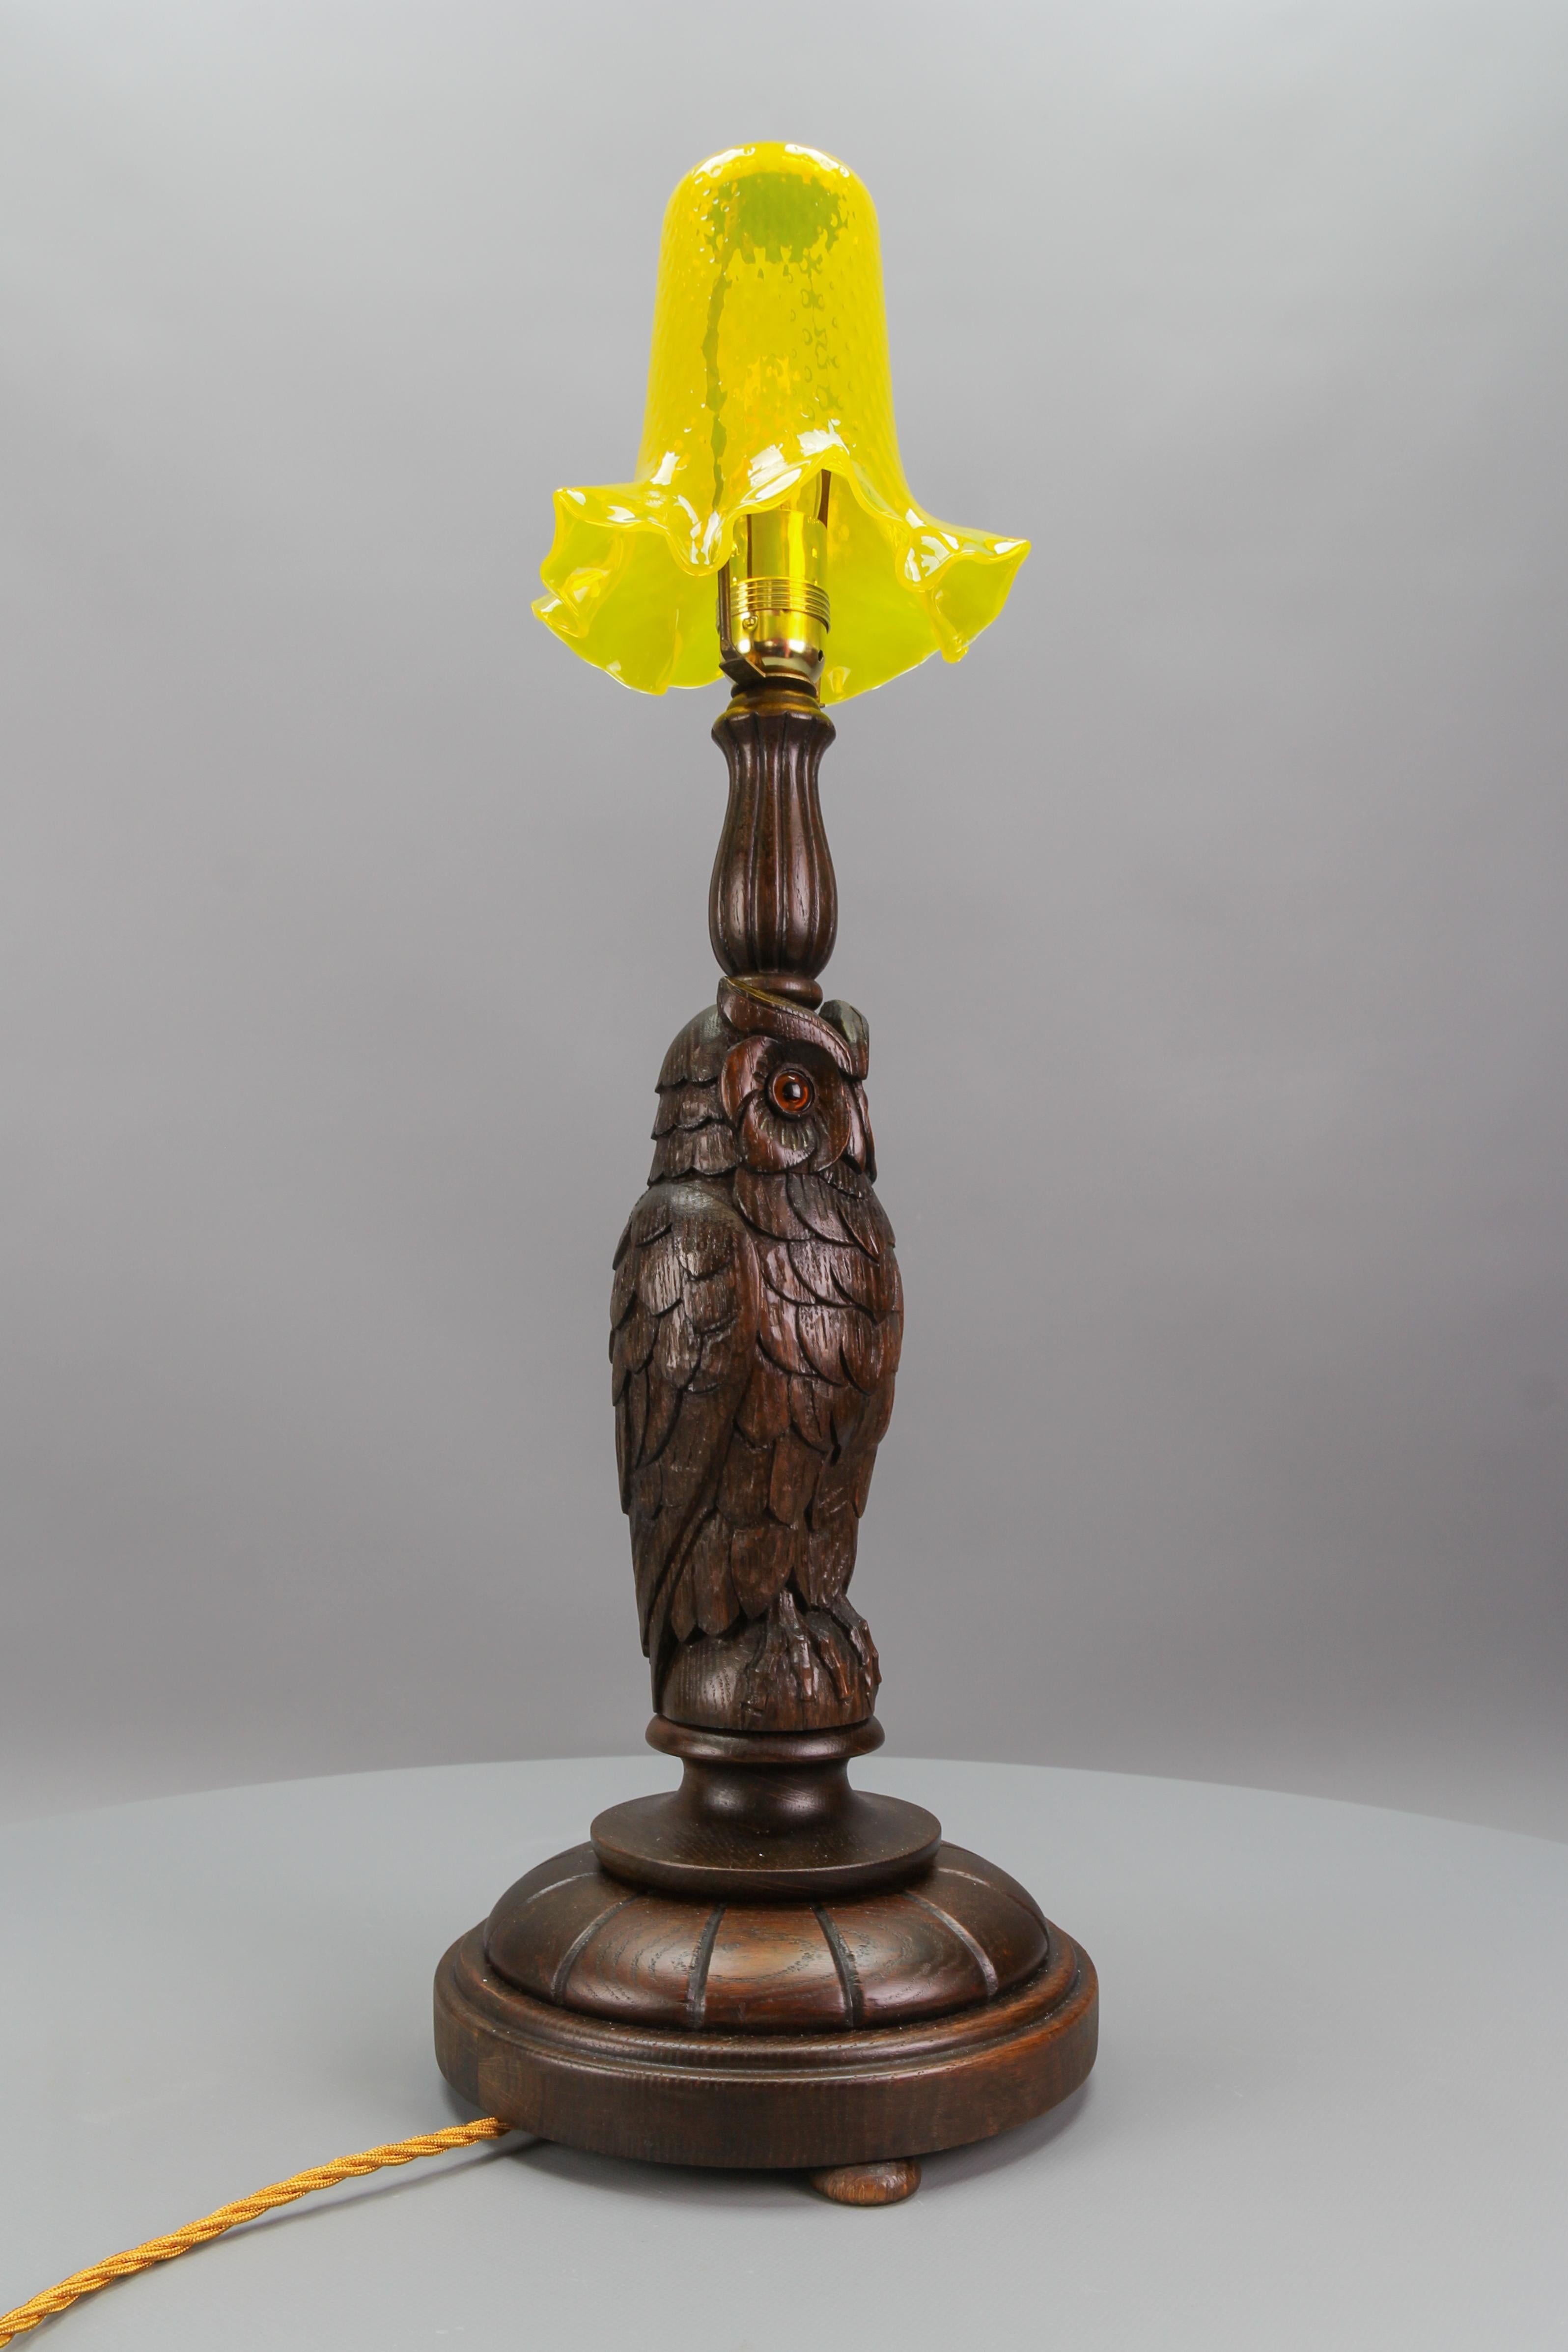 Early 20th Century Art Deco Table Lamp with Owl Sculpture and Yellow Glass Lampshade, ca. 1920 For Sale